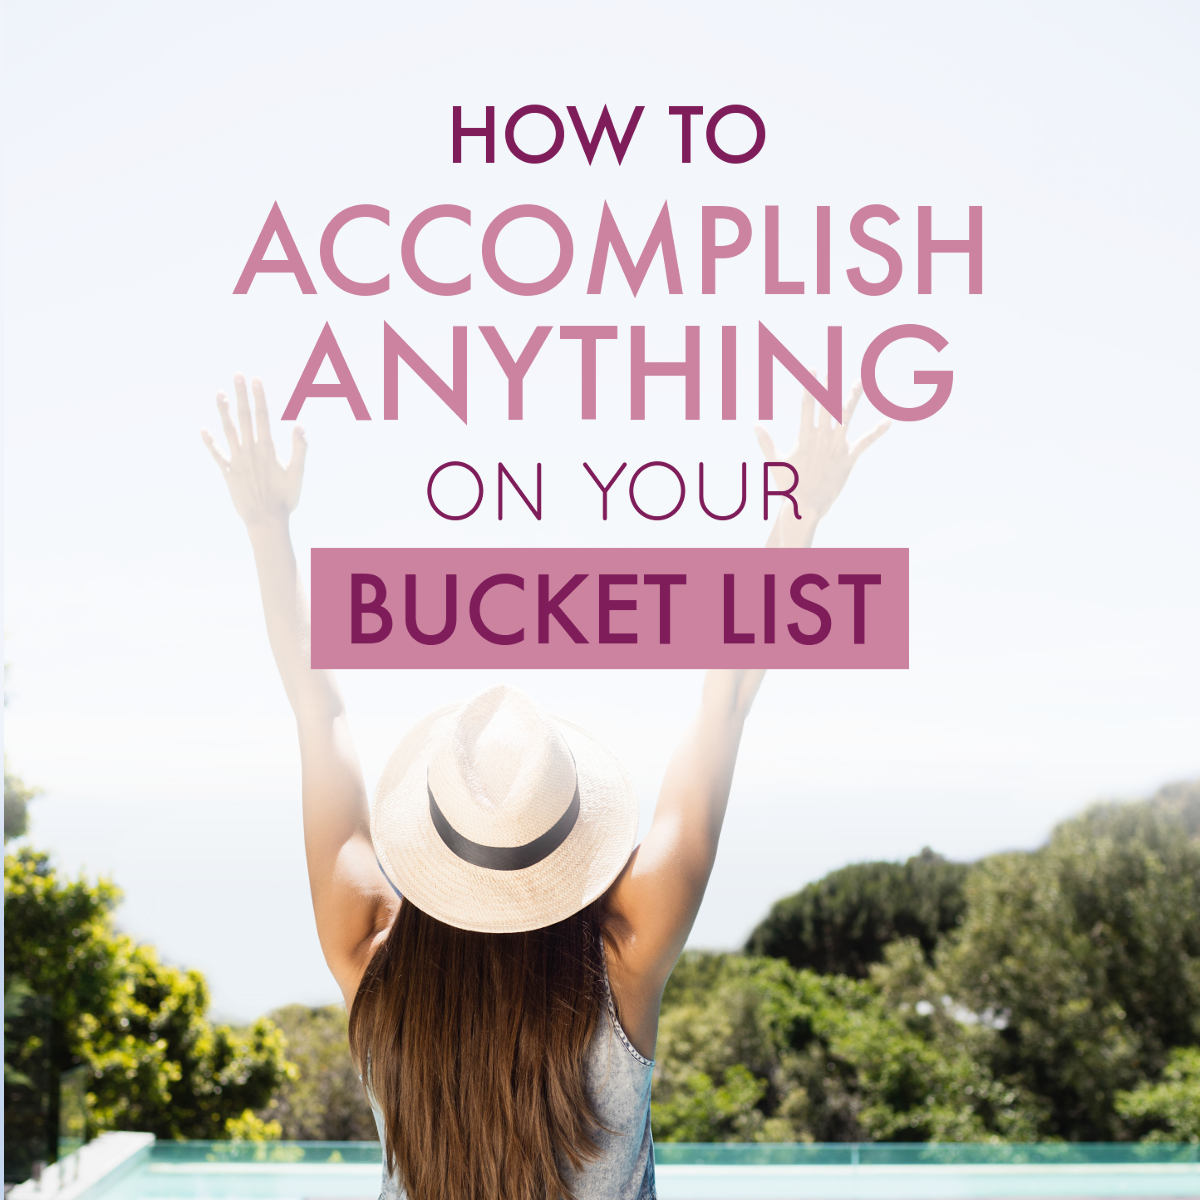 How to Accomplish Anything On Your Bucket List